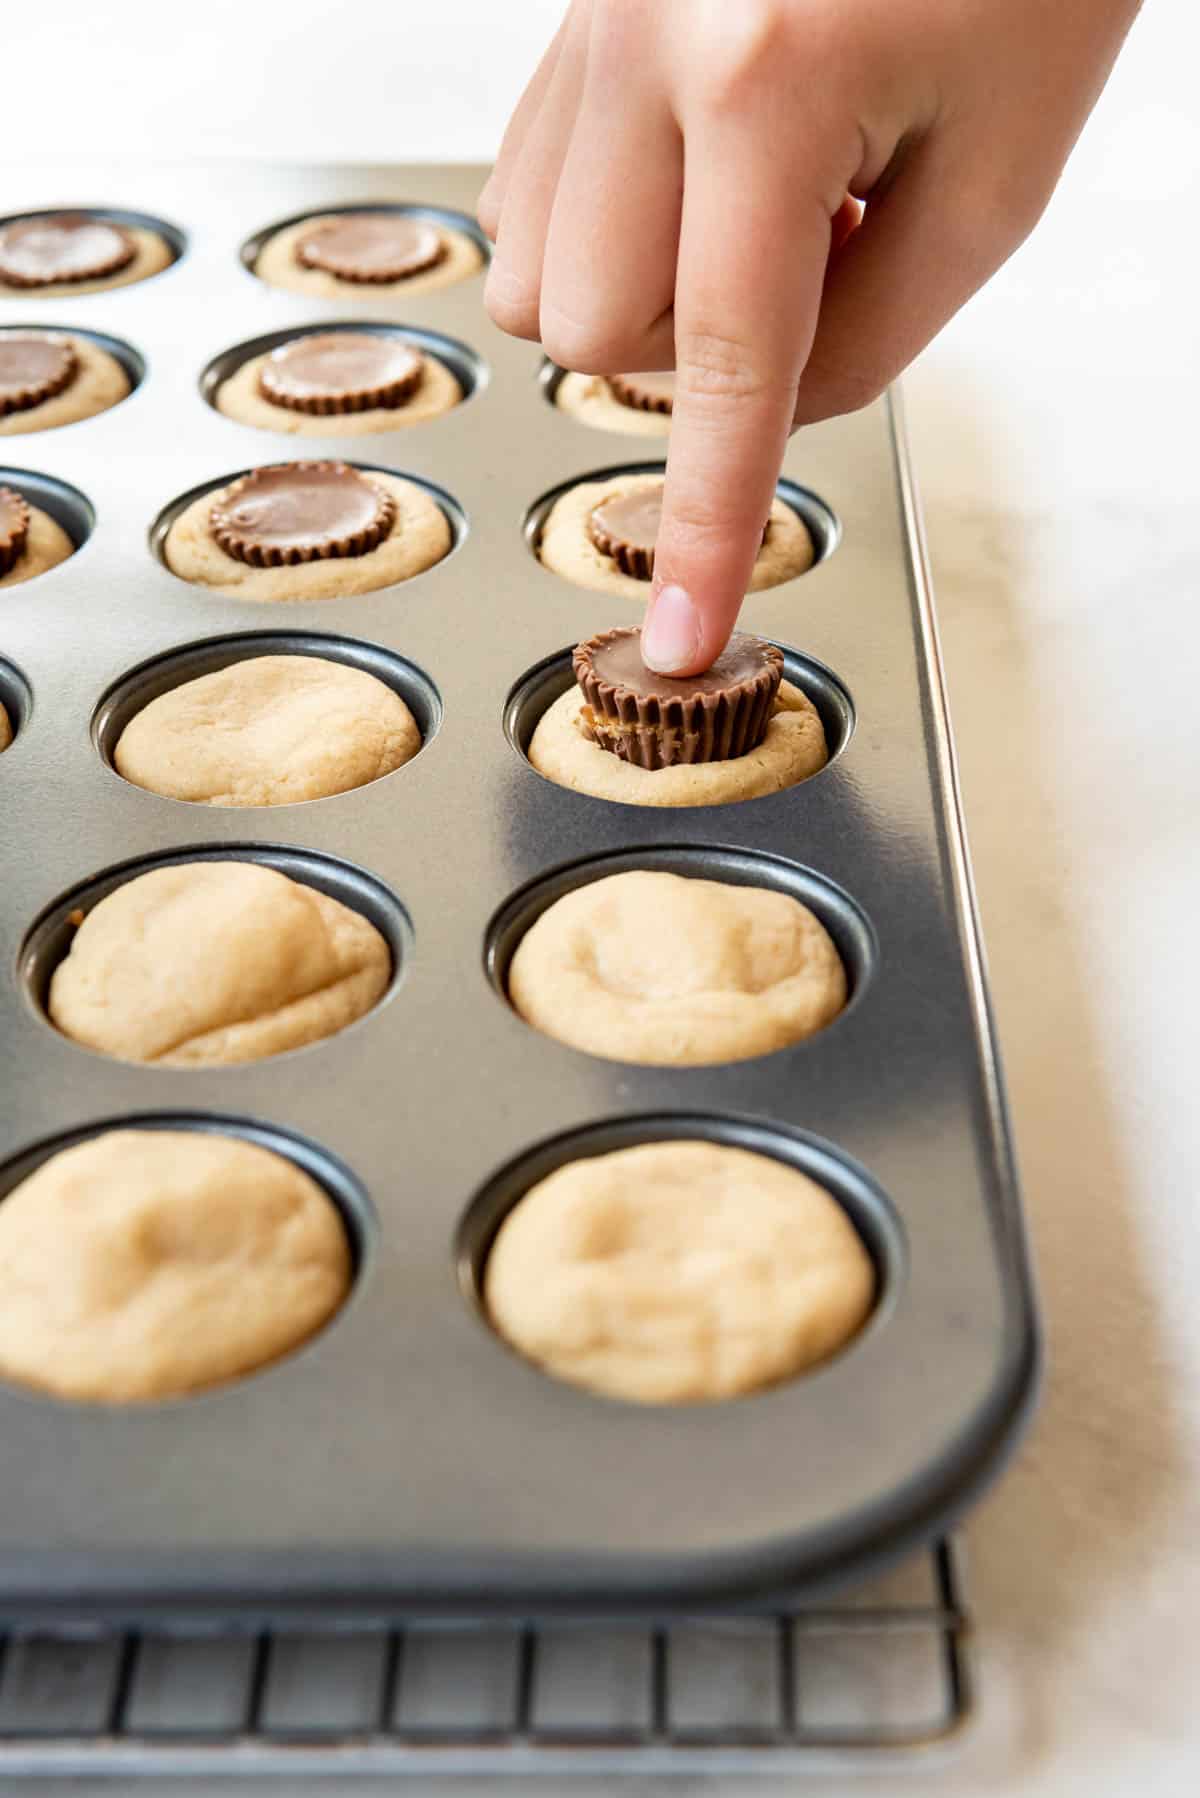 A finger pushing an unwrapped mini Reese's peanut butter cup into baked peanut butter cookie dough in a mini  muffin pan.